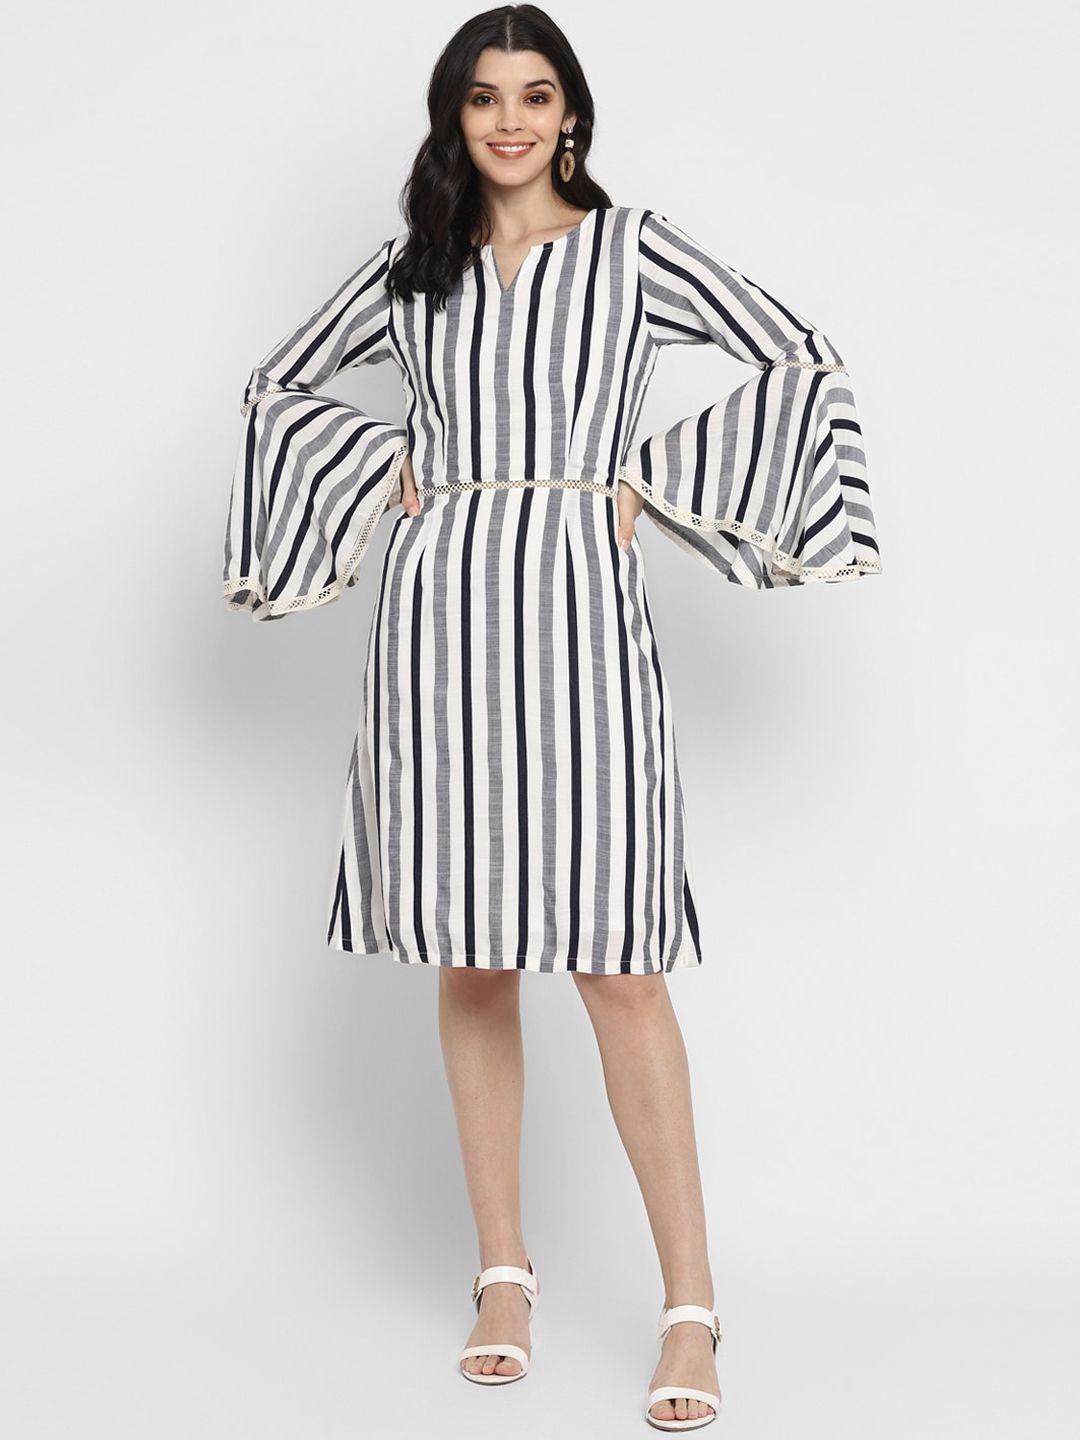 deebaco-navy-blue-striped-bell-sleeved-dress-with-lace